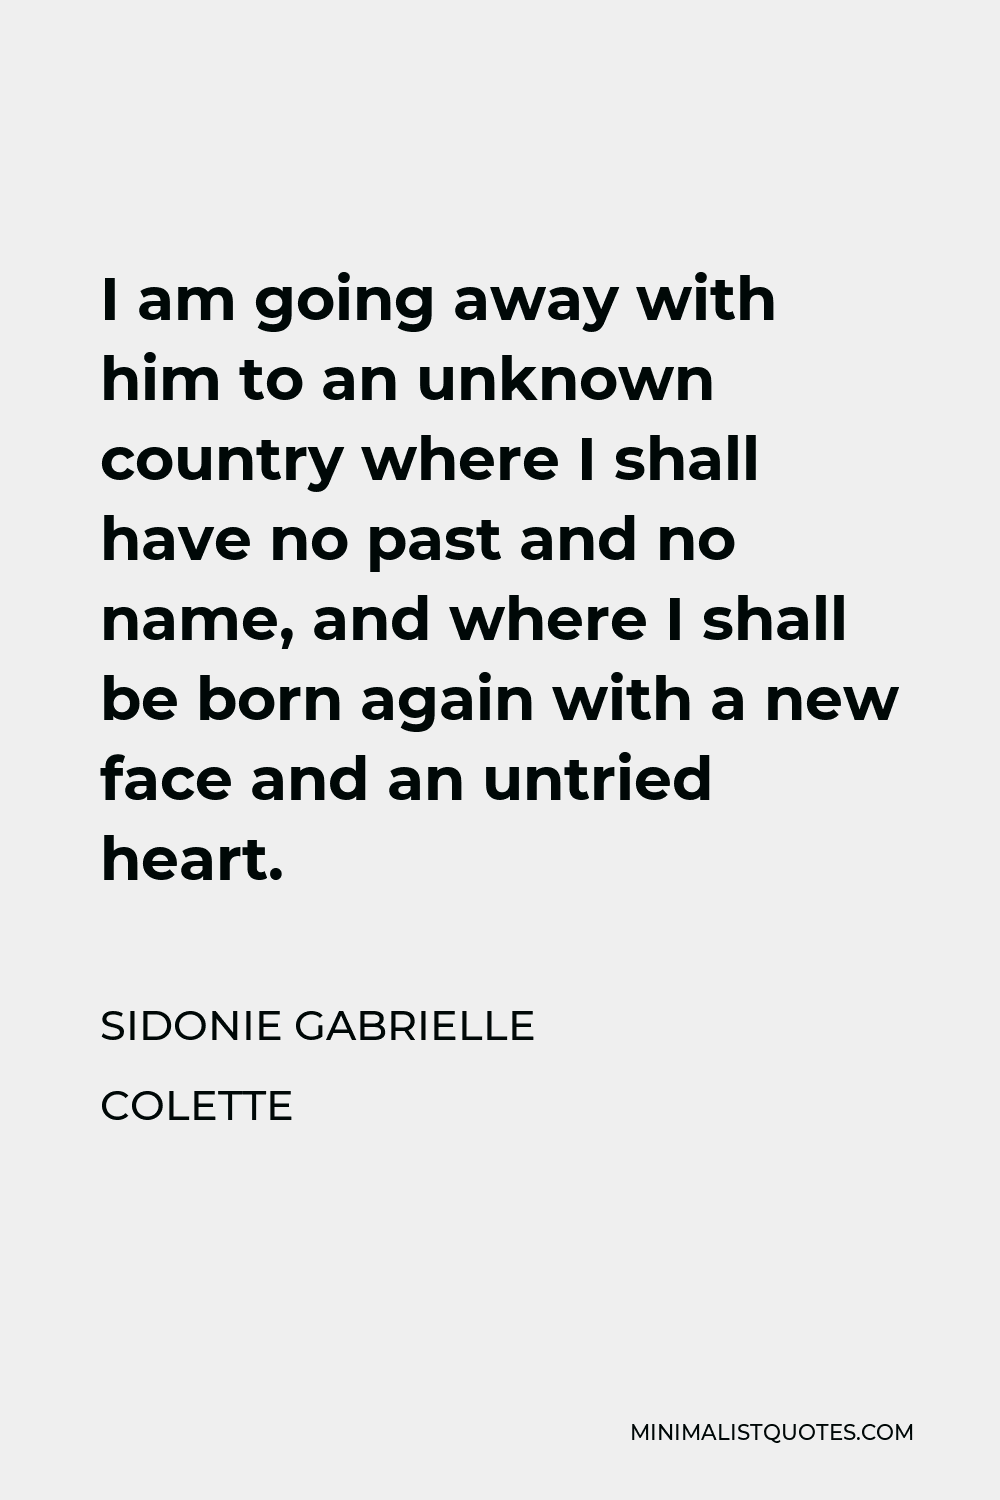 Sidonie Gabrielle Colette Quote - I am going away with him to an unknown country where I shall have no past and no name, and where I shall be born again with a new face and an untried heart.